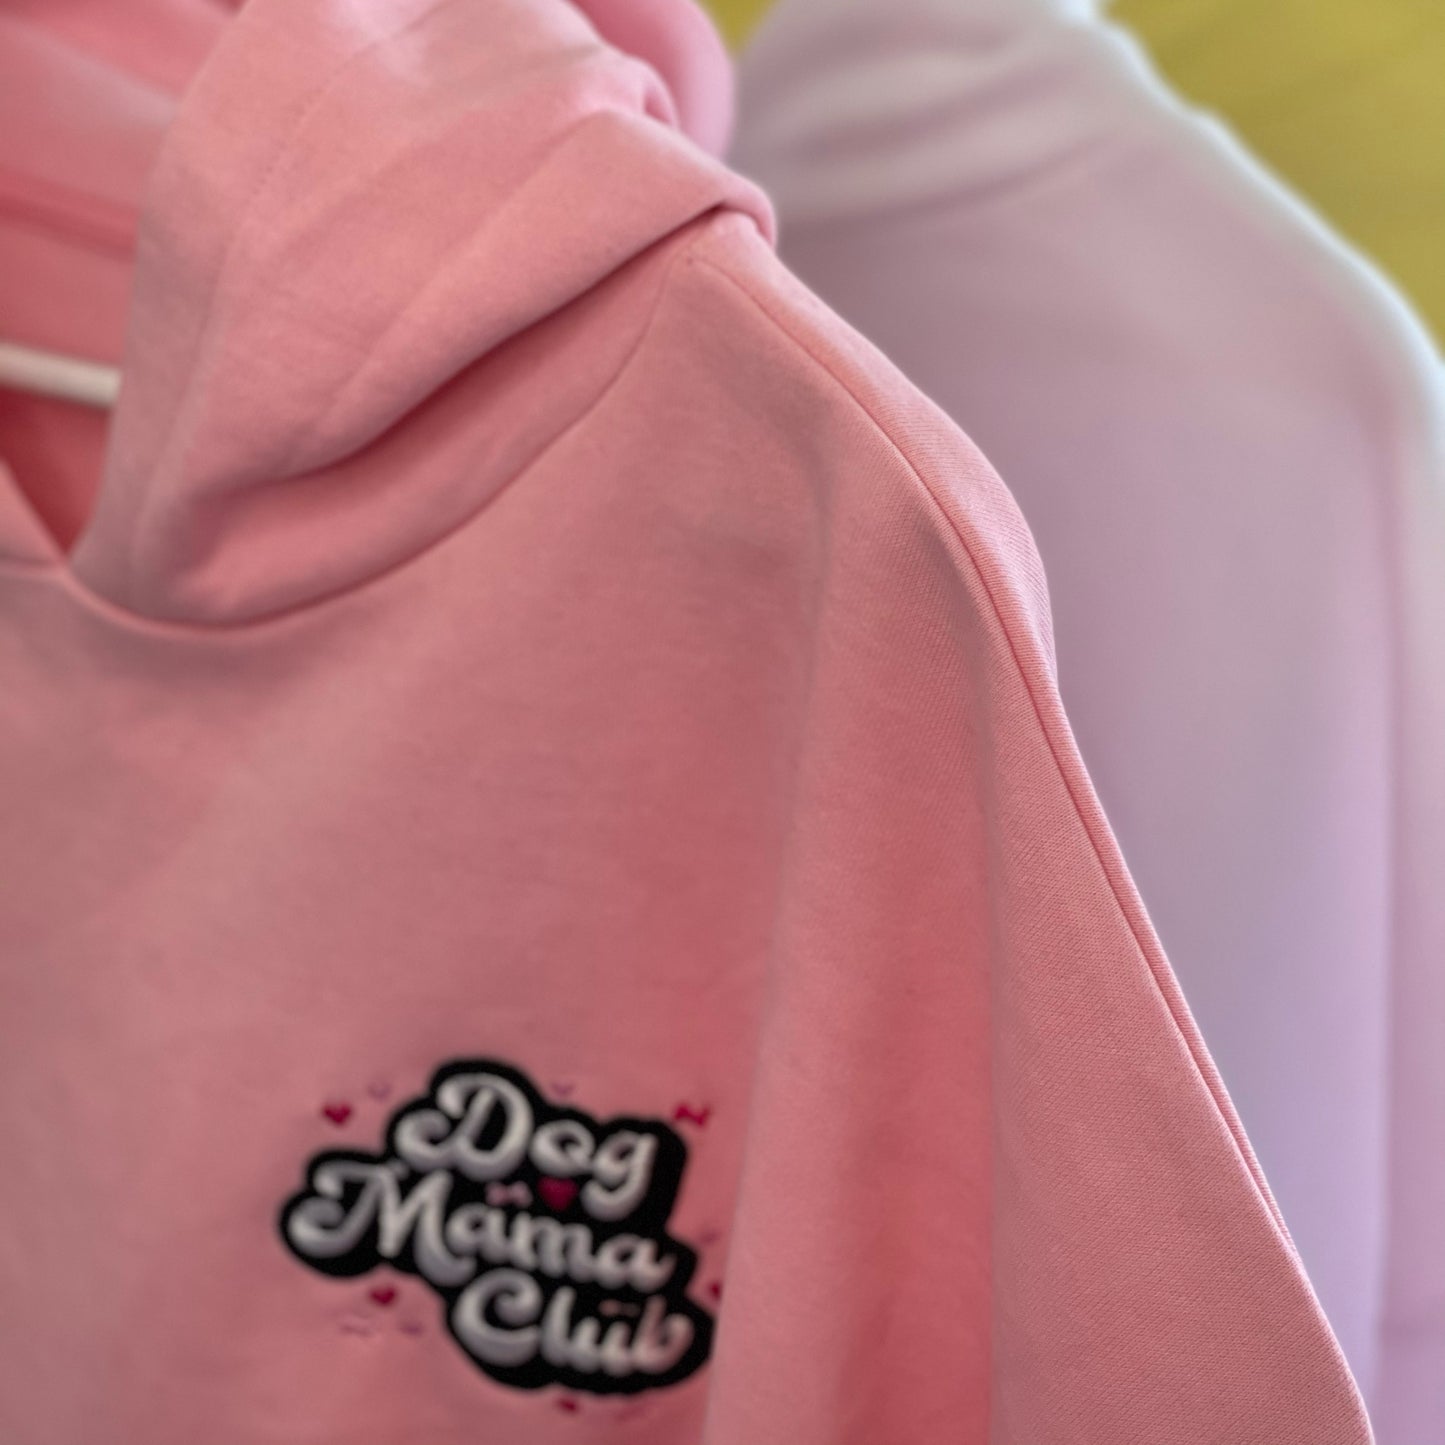 Embroidered Dog Mama Club Cropped Oversized Hoodie